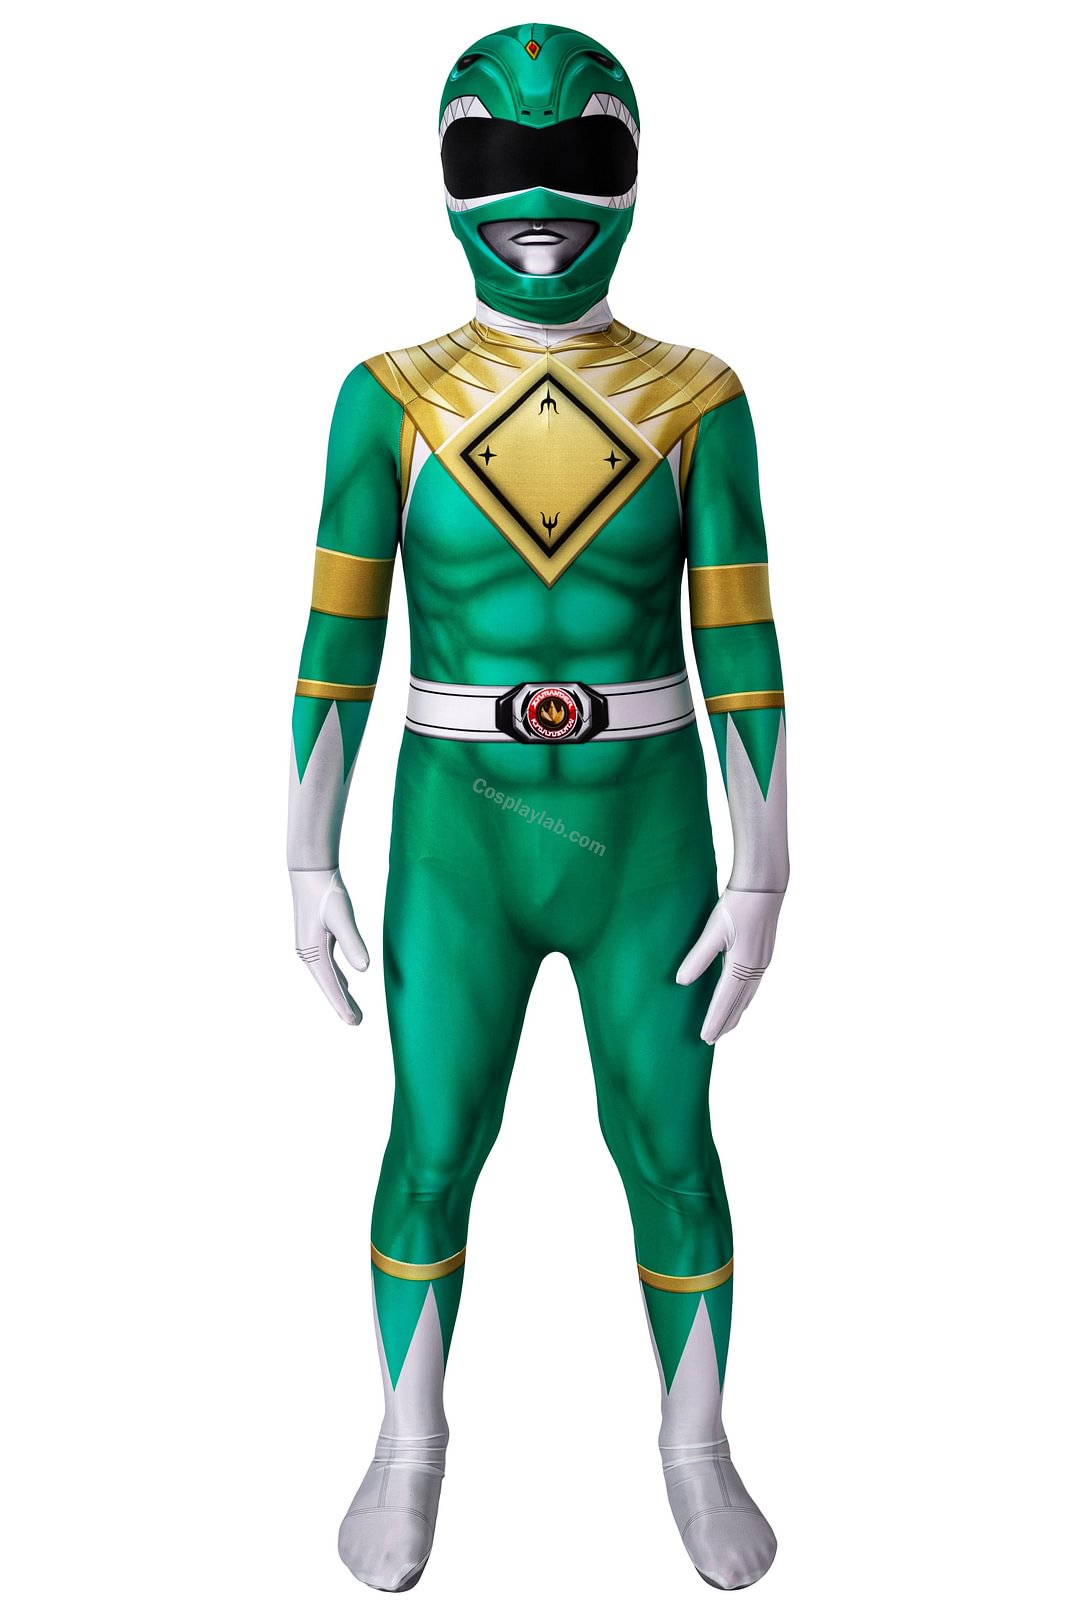 Kids Green Ranger Cosplay Suit Power Rangers Green HQ Printed Spandex Costume Jumpsuit By CosplayLab